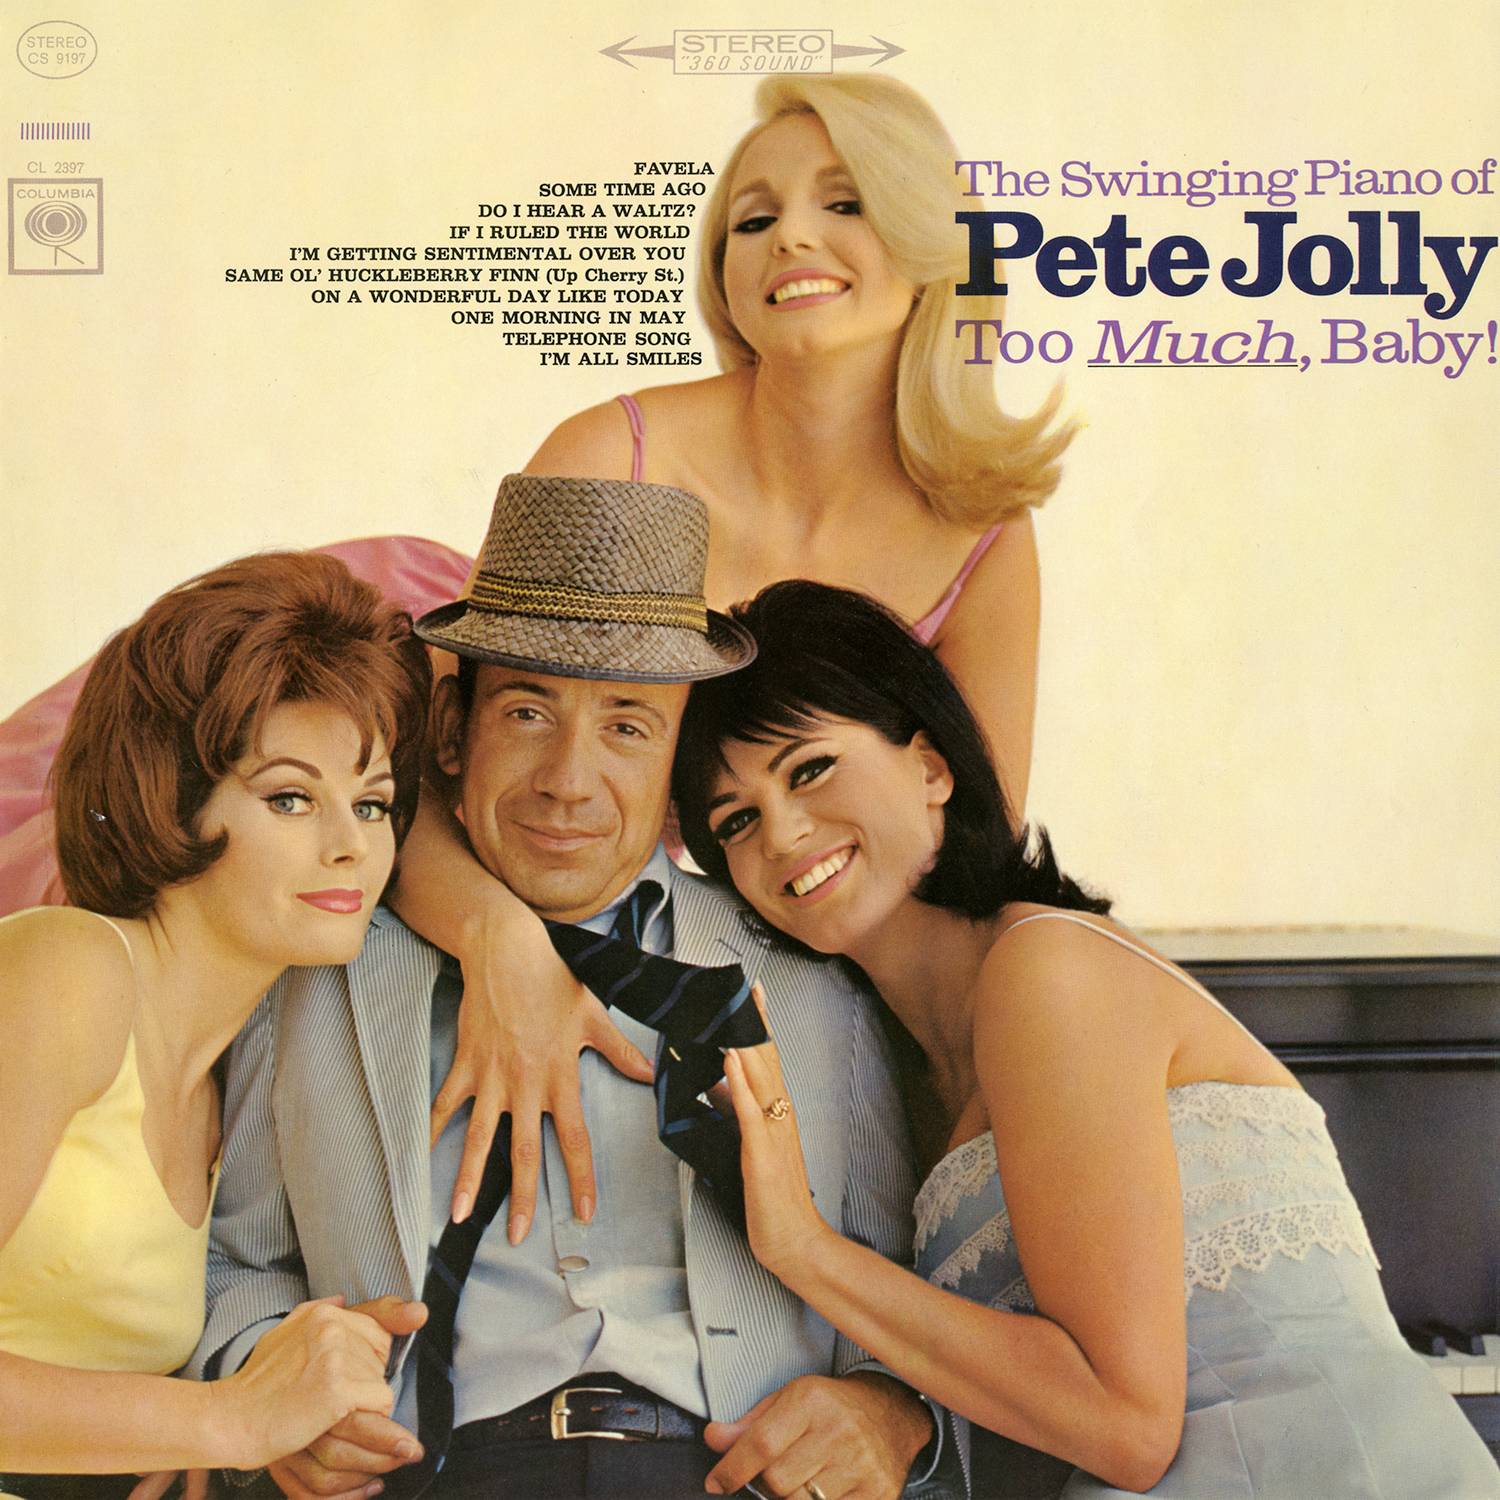 Pete Jolly – Too Much, Baby! (1965/2015) [AcousticSounds FLAC 24bit/96kHz]